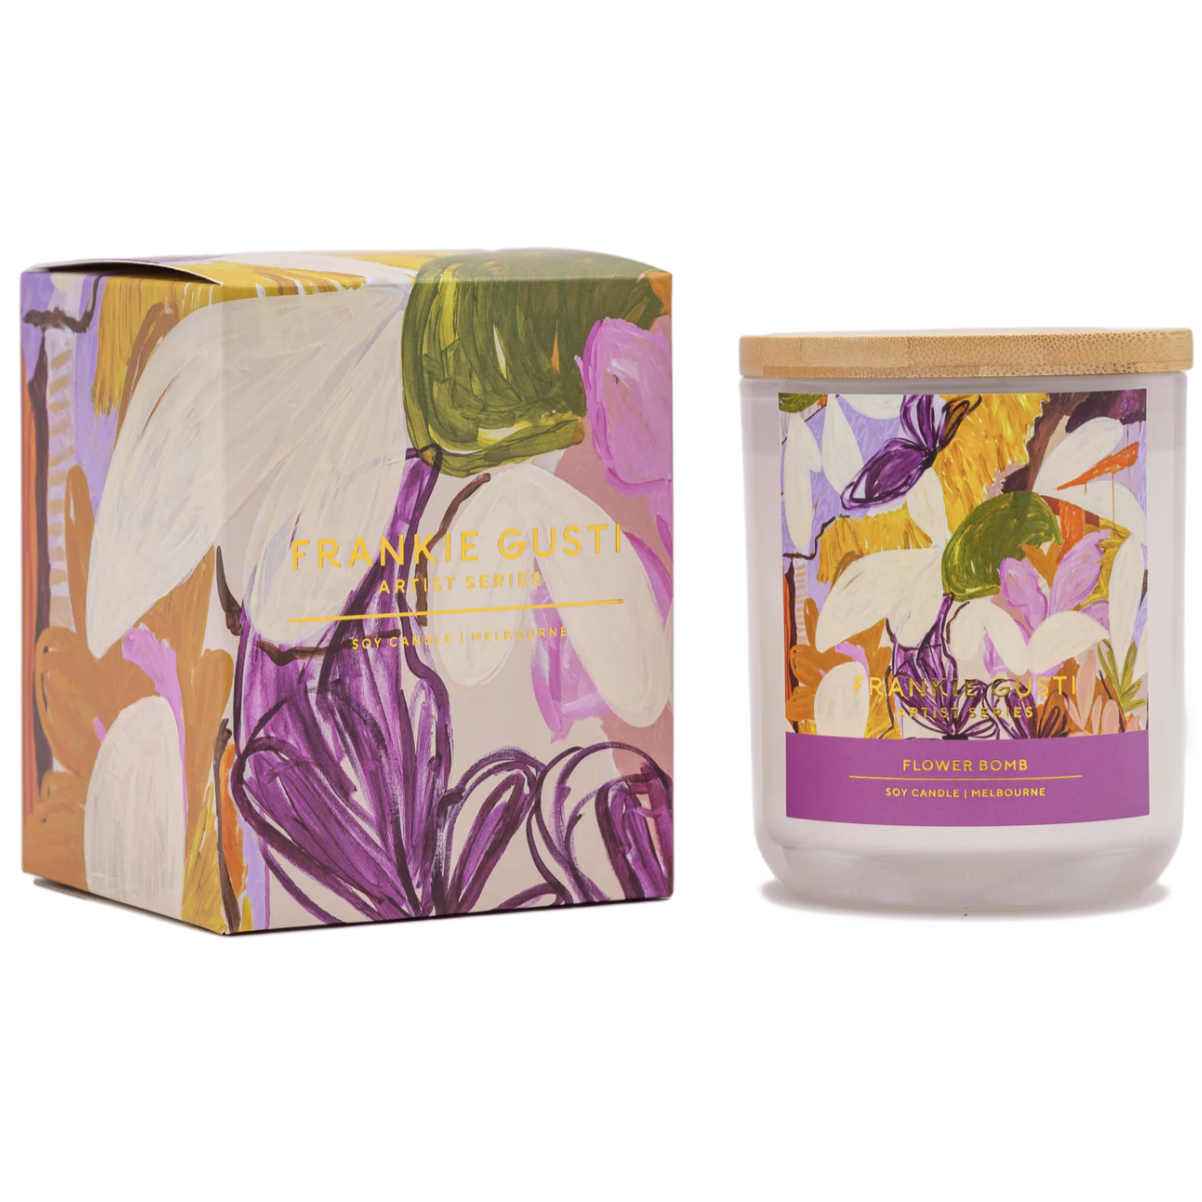 FRANKIE GUSTI ARTIST SERIES KATE MAYES FLOWER BOMB CANDLE